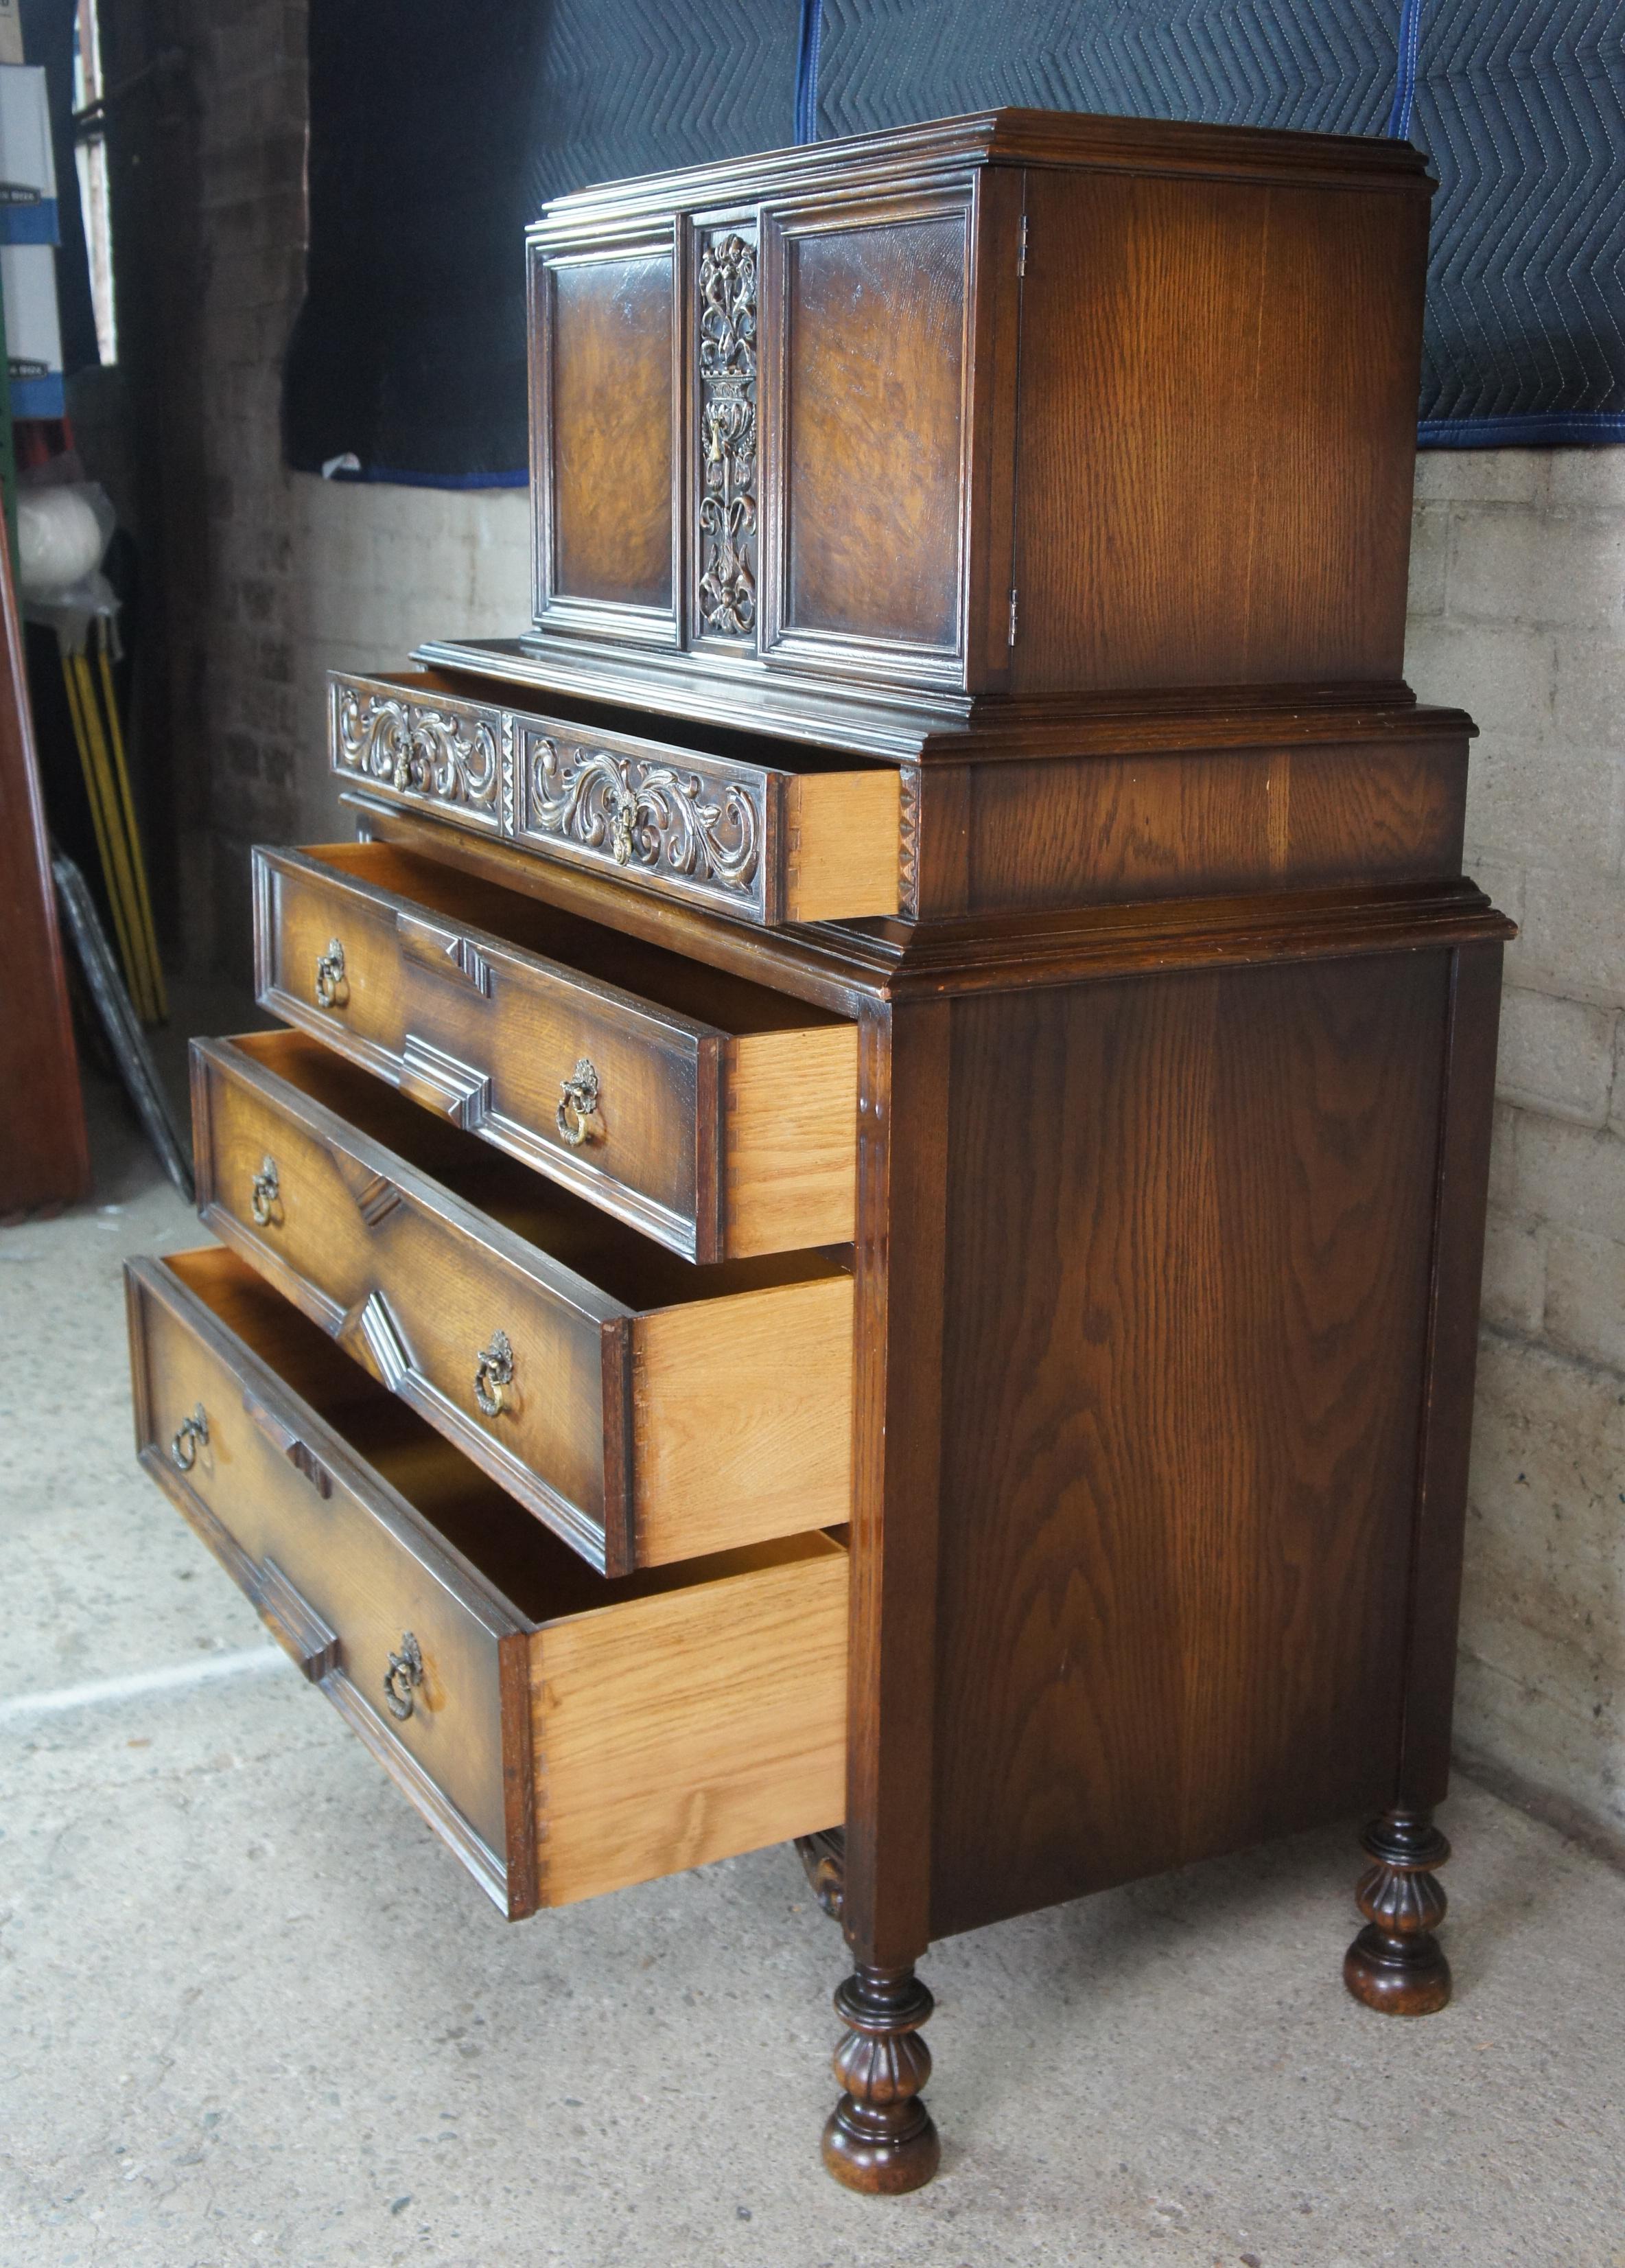 American Furniture Company Gothic Revival Oak Tallboy Dresser Chest of Drawers In Good Condition For Sale In Dayton, OH